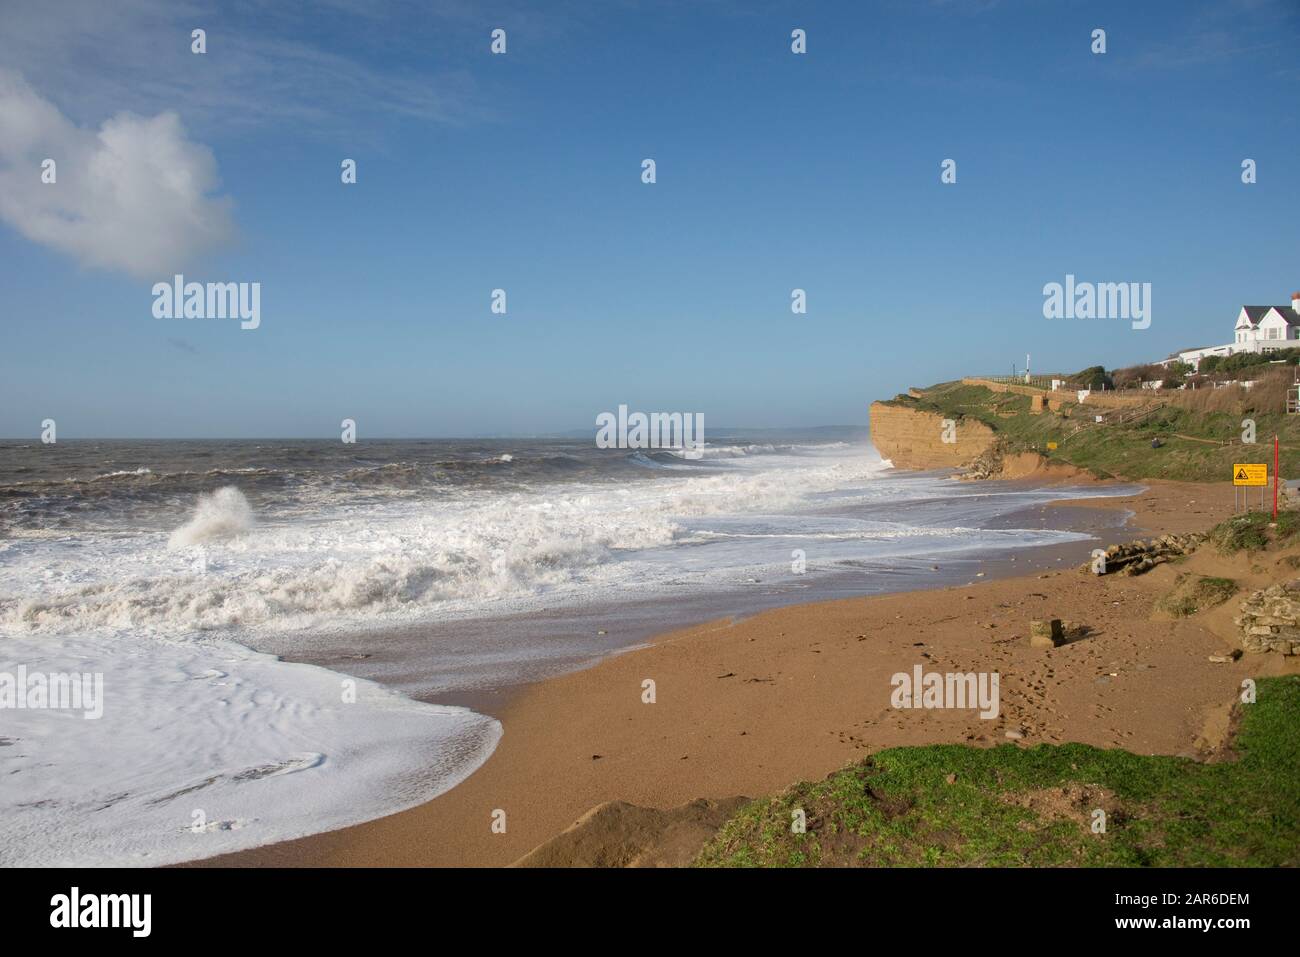 High white waves pounding the beach and sandstone cliffs at high tide on a fine day at  Hive Beach, near West Bay, Dorset, January Stock Photo